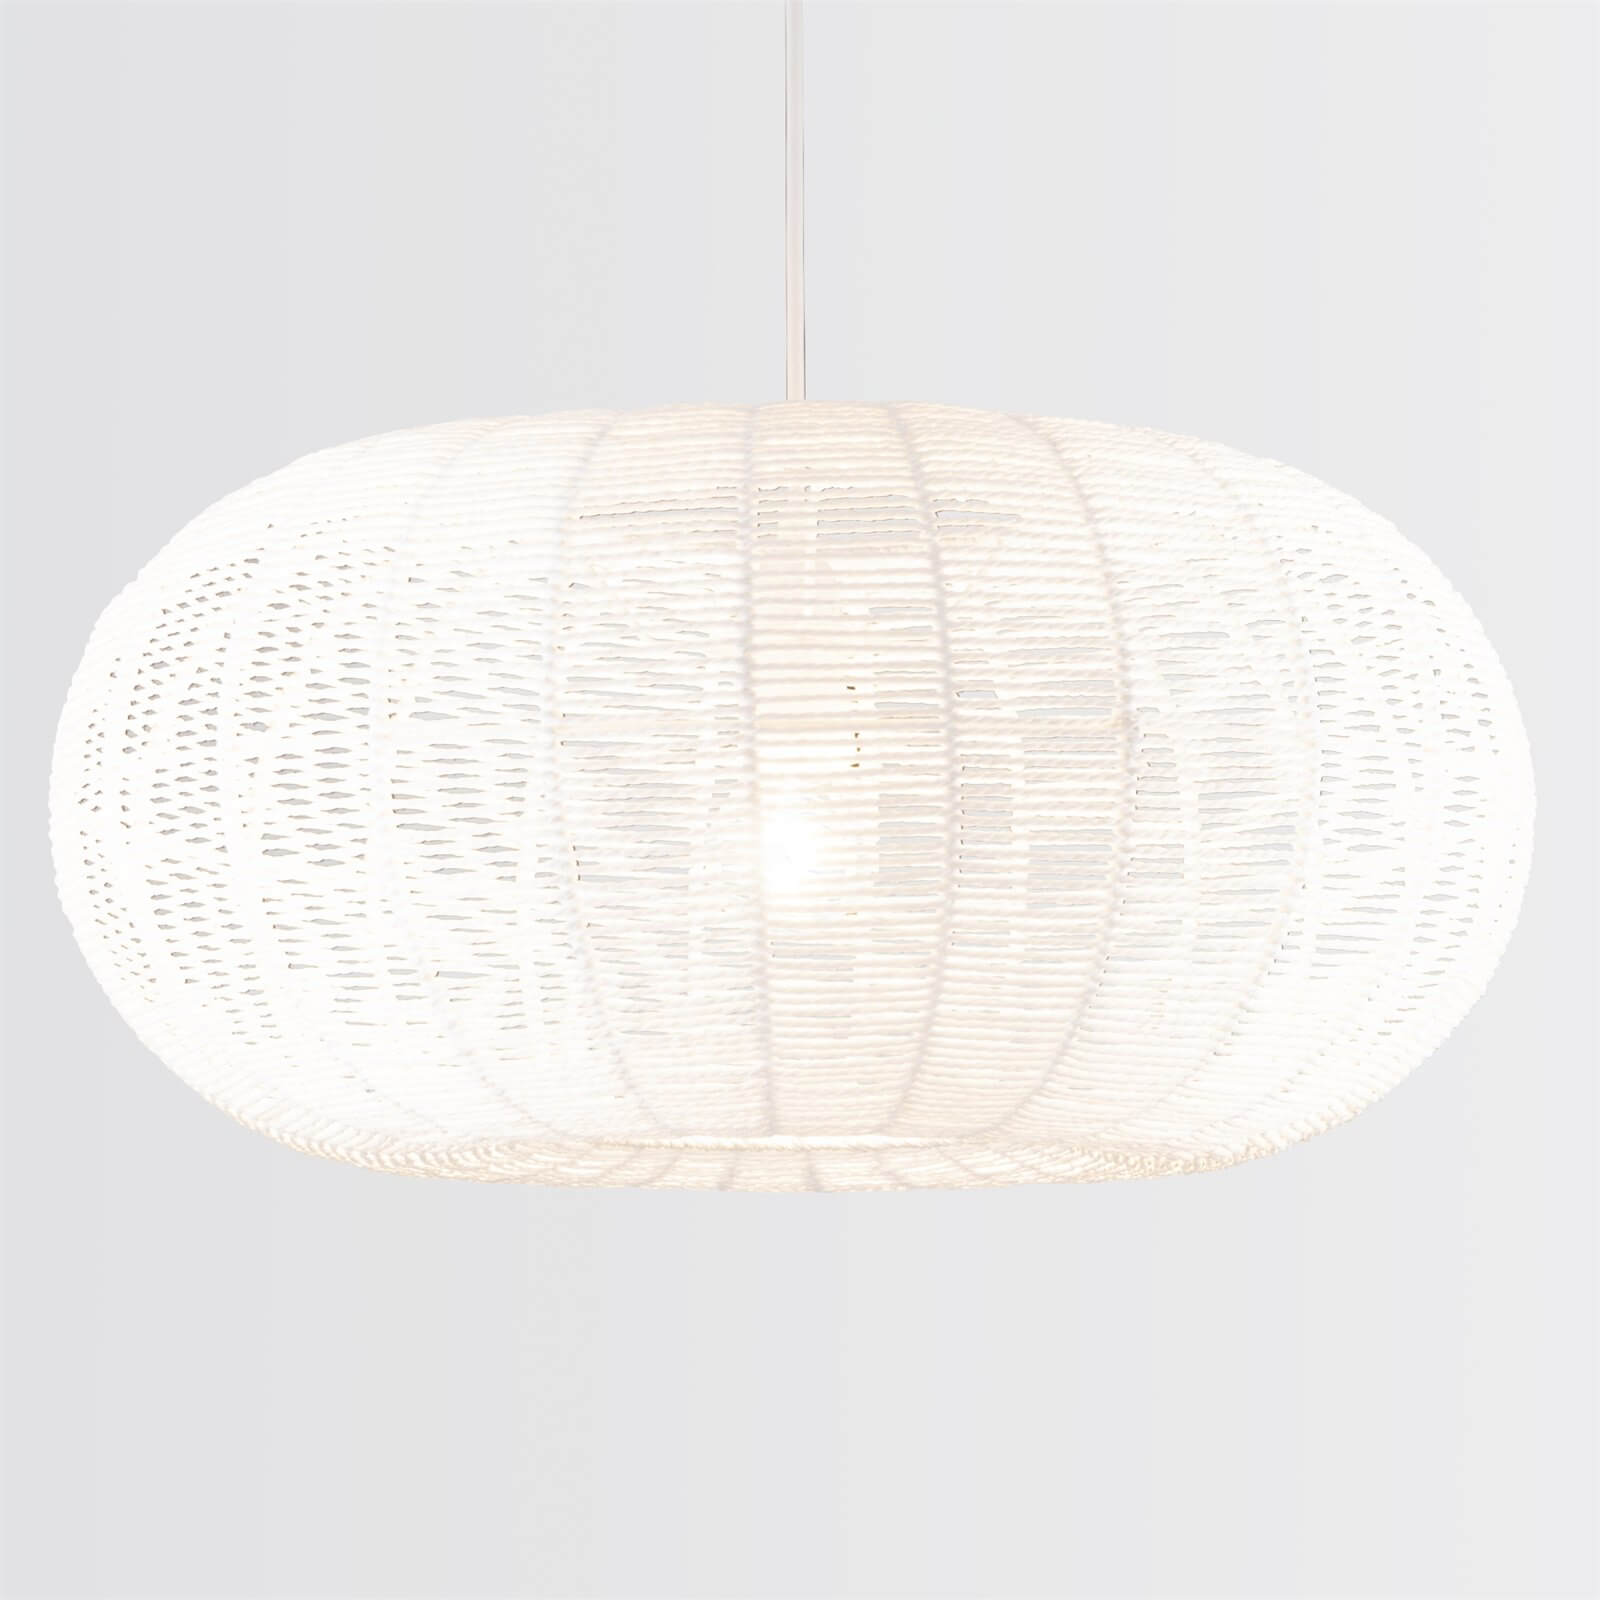 Rocco Rope Lamp Shade, 50cm